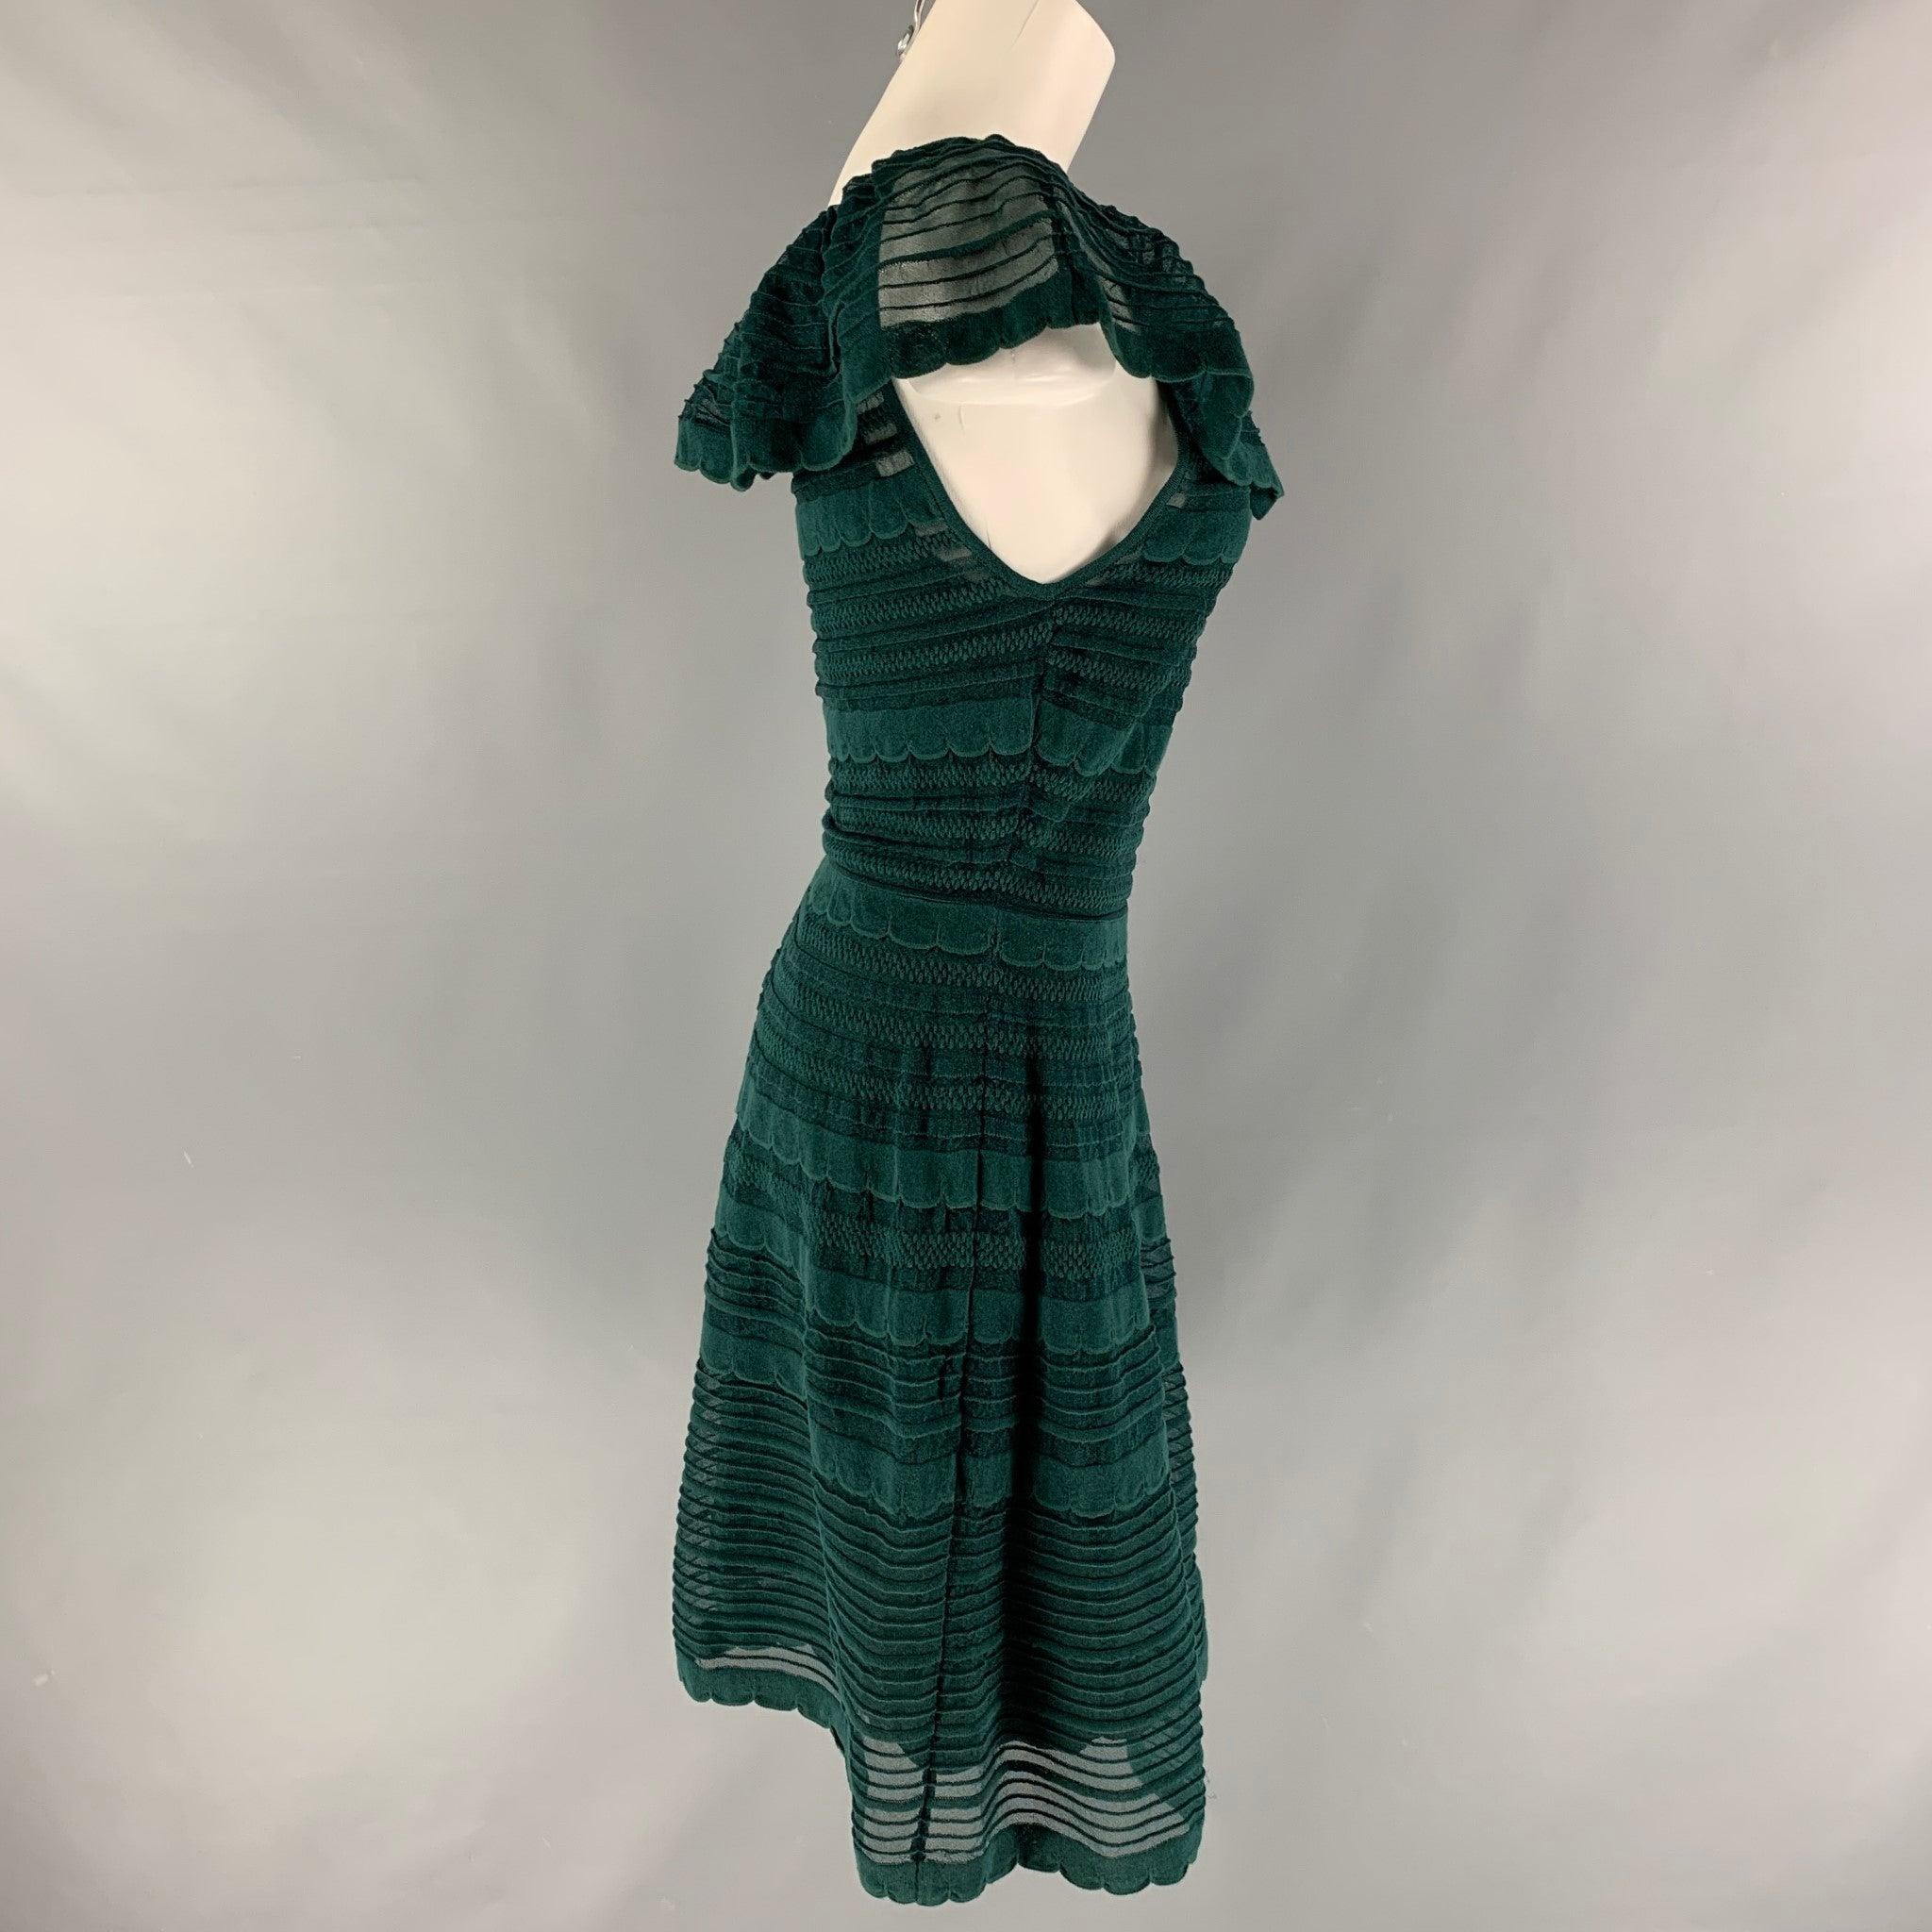 M MISSONI A-line dress comes in a green cotton blend knit fabric featuring a ruffle neckline design. Made in Italy.Very Good Pre-Owned Condition. Minor sign of wear.  

Marked:   42 IT 

Measurements: 
  Bust: 32 inches Waist: 28 inches Hip: 43